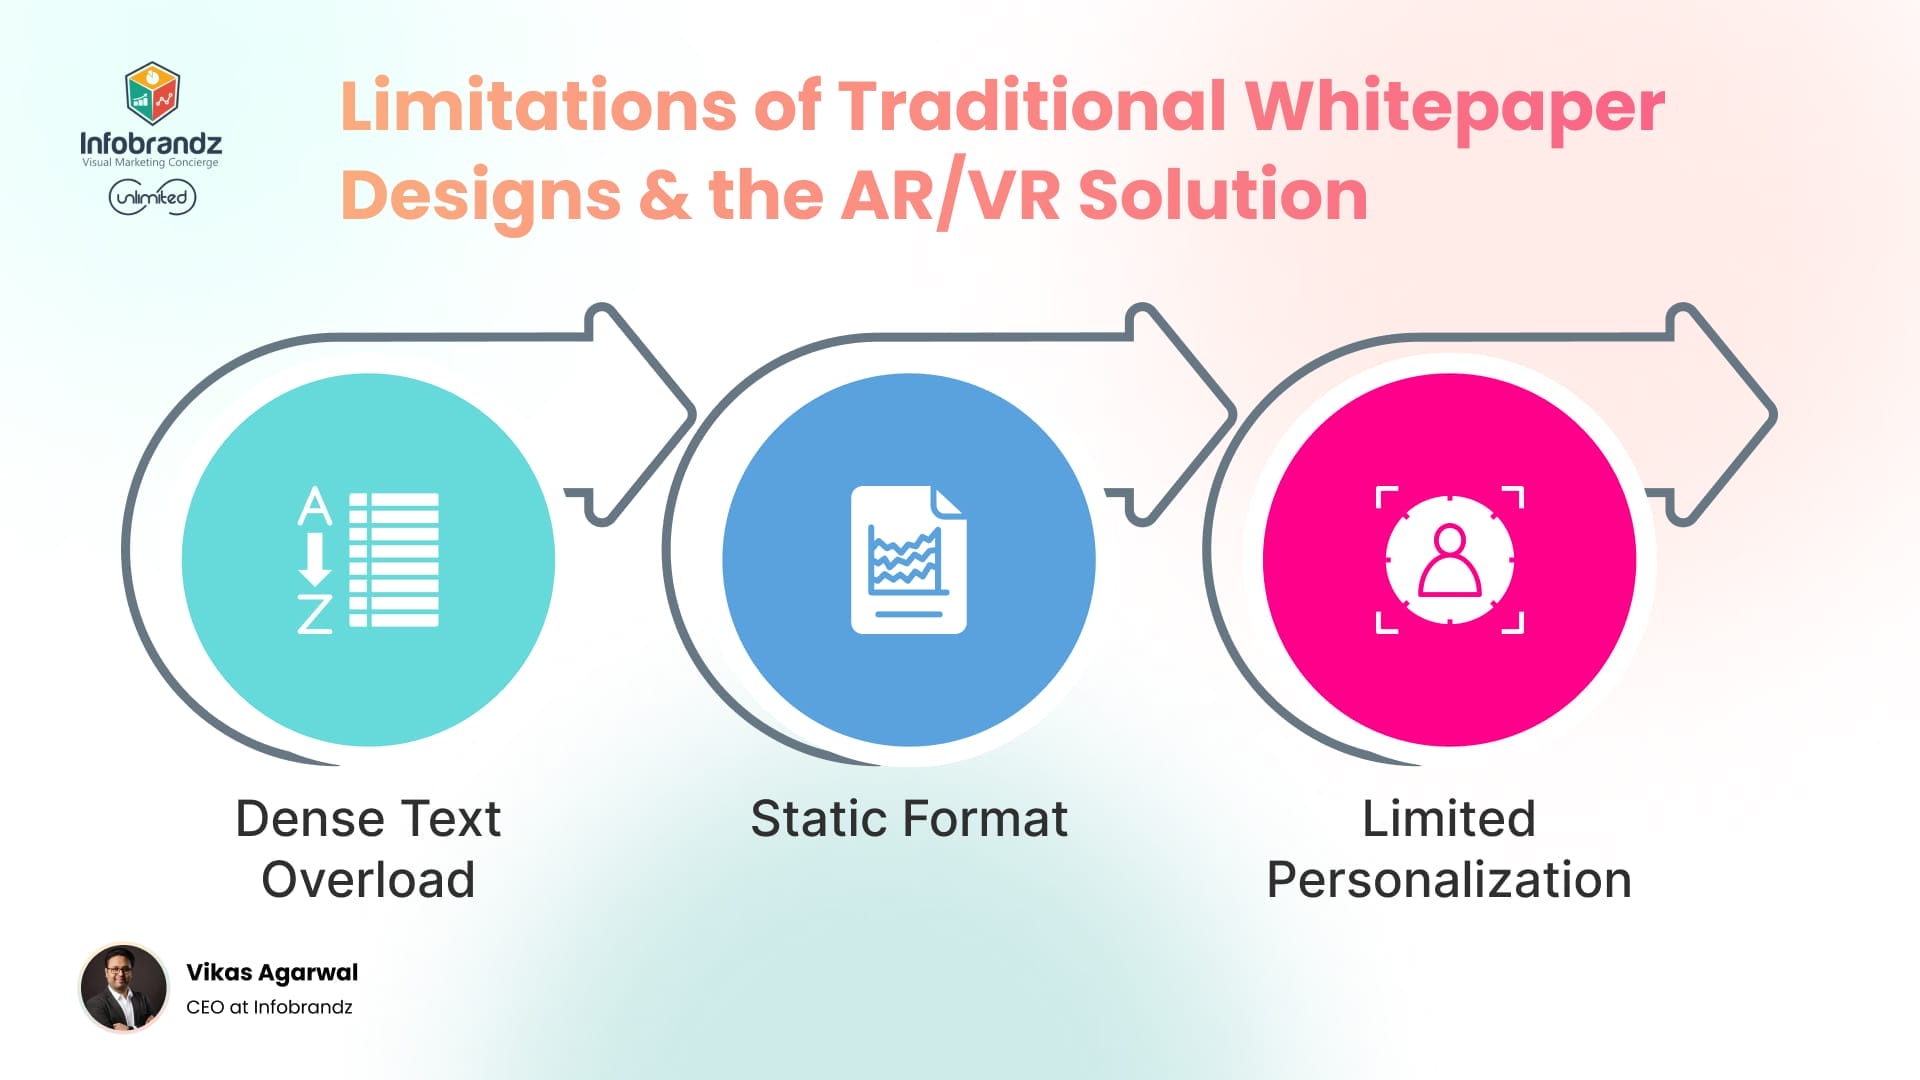 Limitations of Traditional Whitepaper Designs & the AR/VR Solution